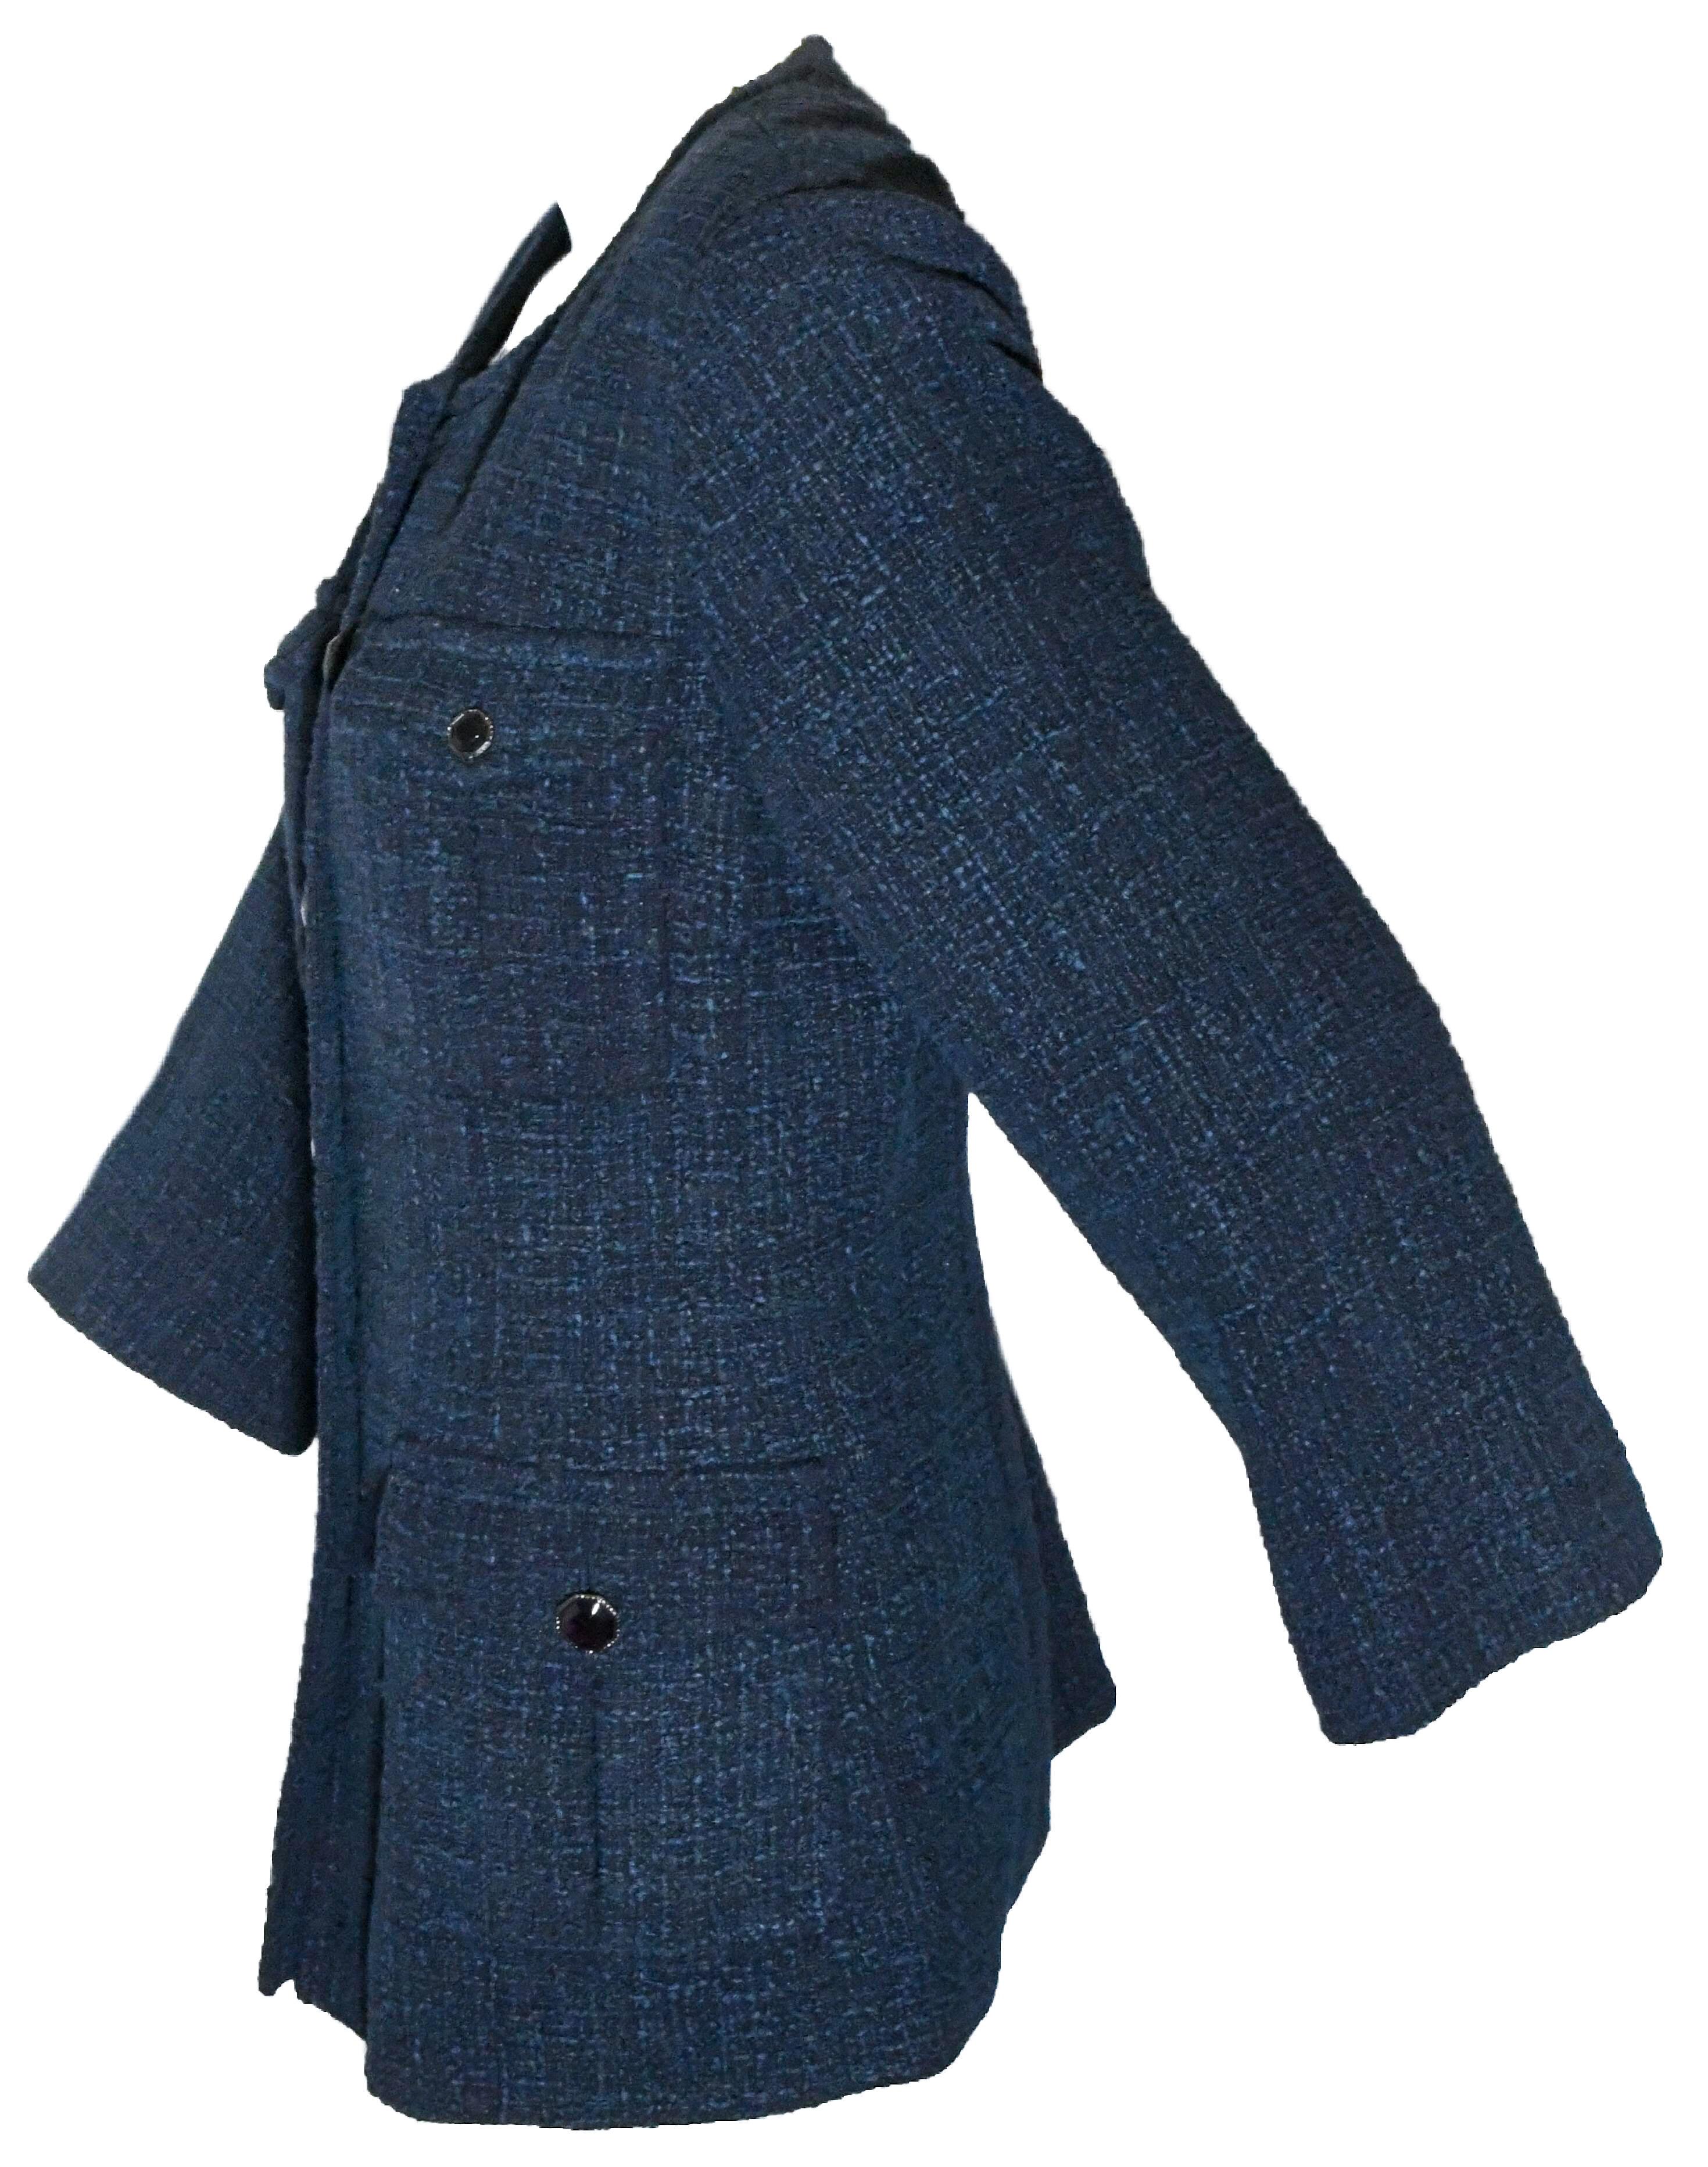 Chanel blue tweed jacket has 4 front flap pockets that feature signature gripoix purple stone button.  The round neckline collarless jacket incorporates 6 purple gripoix buttons for front closure and has single rear vent and flared cuffs.  Fully